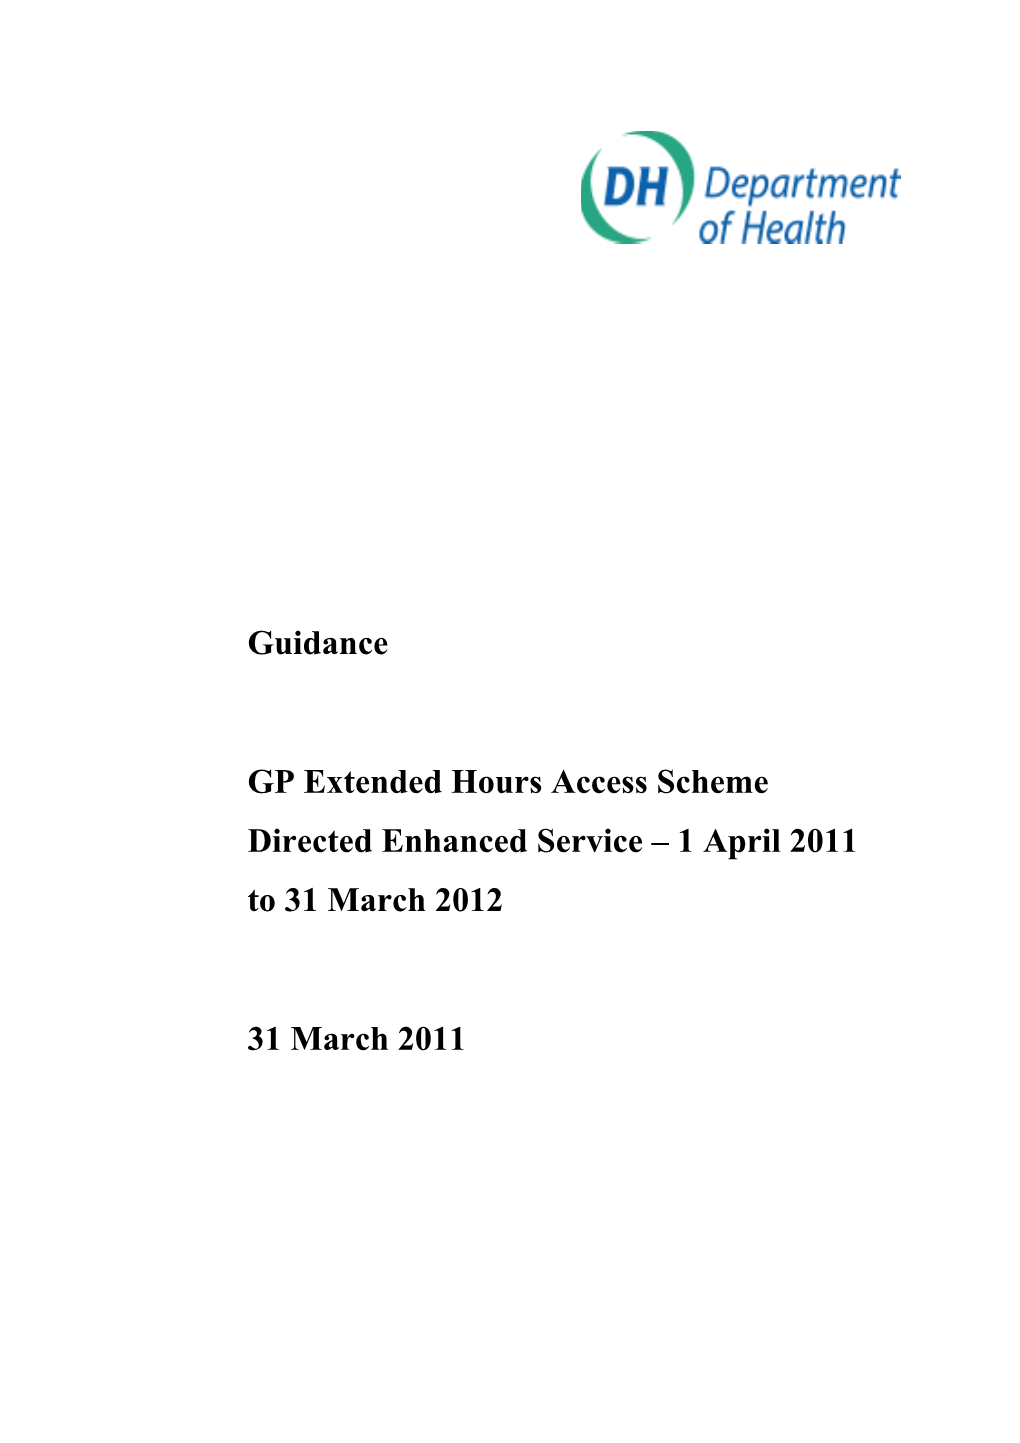 GP Extended Hours Access Scheme Directed Enhanced Service 1 April 2011 to 31 March 2012